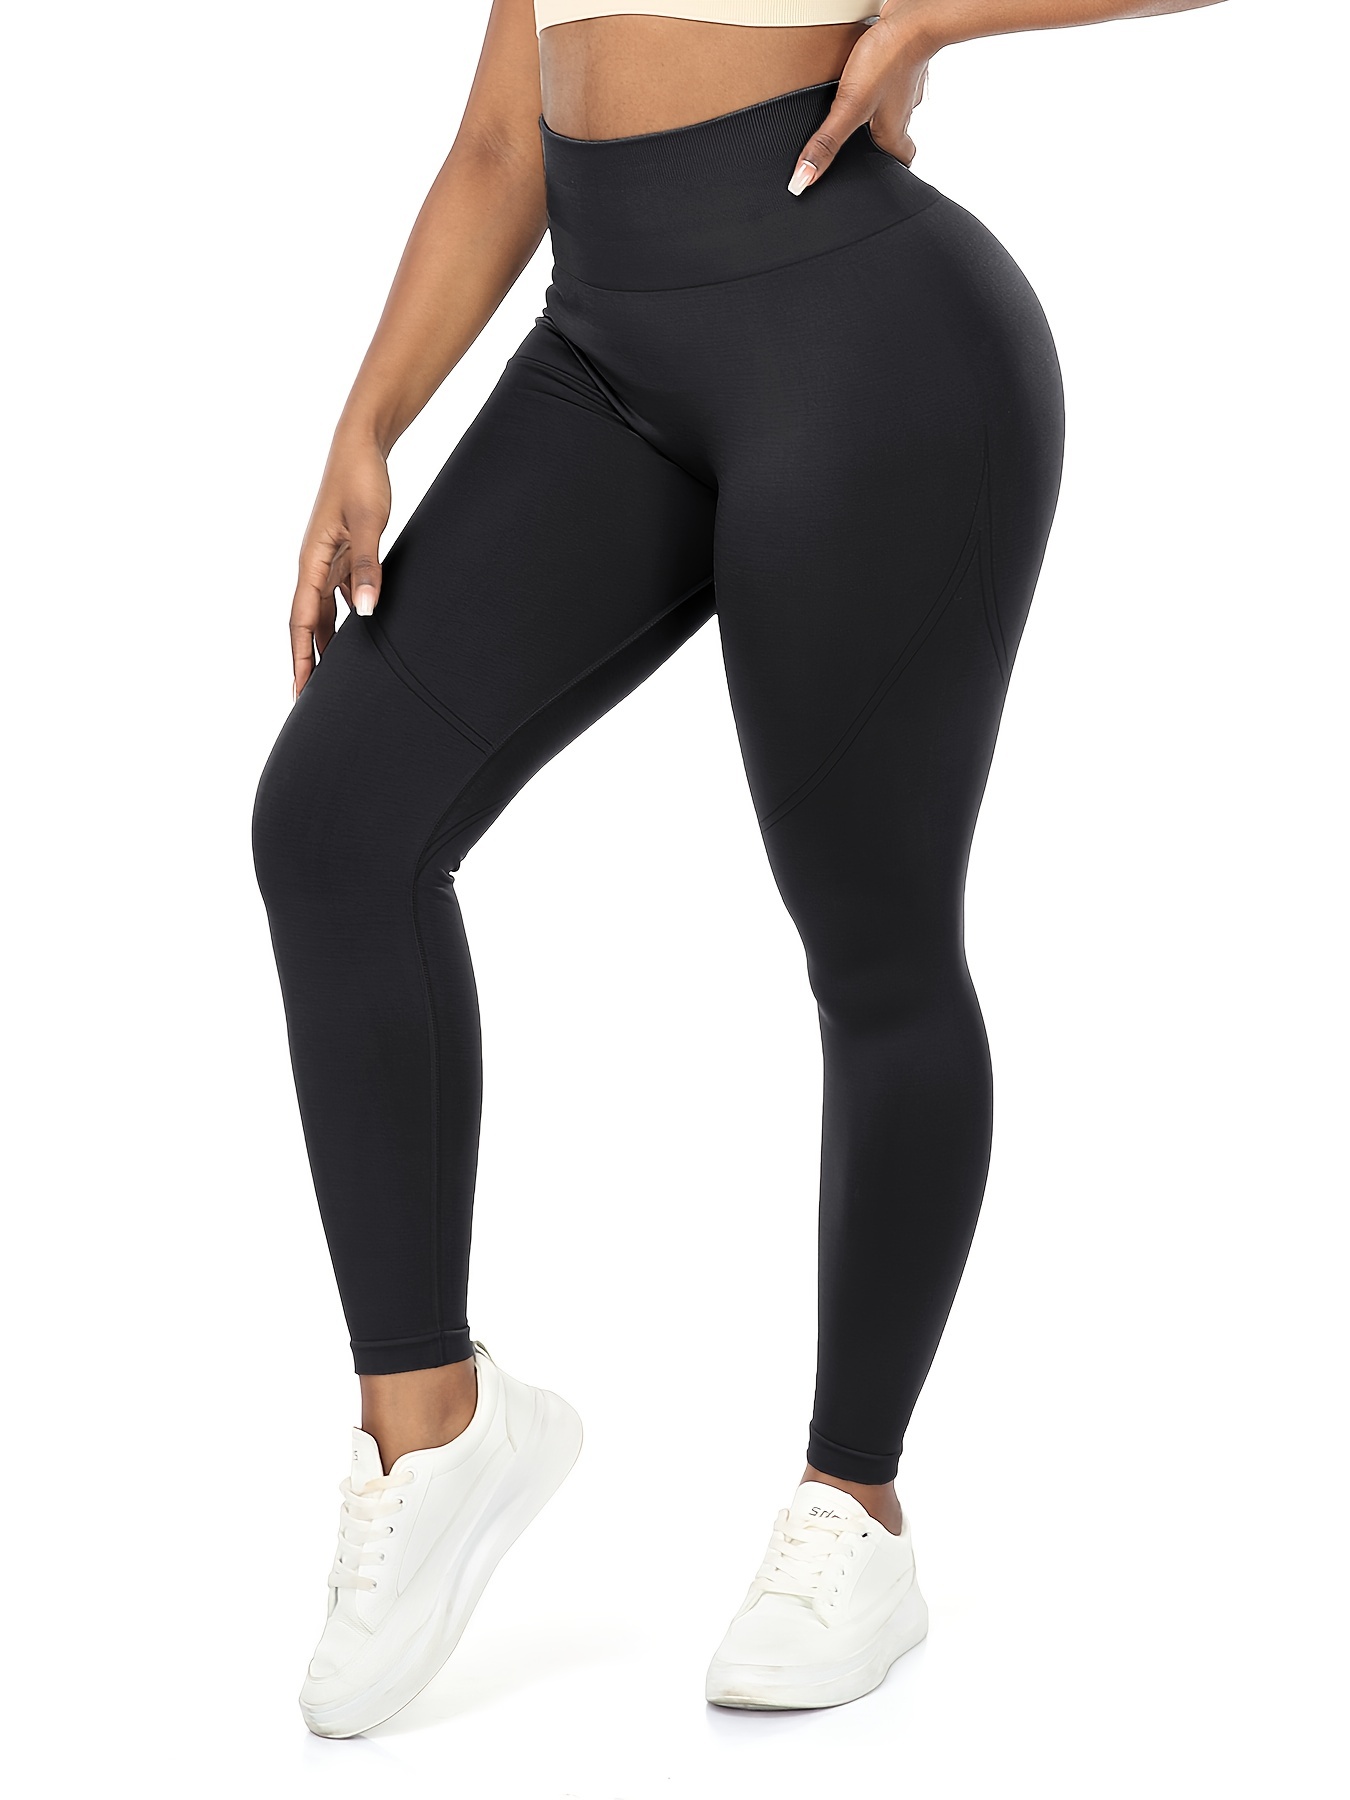 SELONE Plus Size Leggings for Women Workout Butt Lifting Gym Long Length  Seamless High Waist Running Sports Yogalicious Utility Dressy Everyday Soft  Jeggings Athletic Leggings for Women 31-Black M 